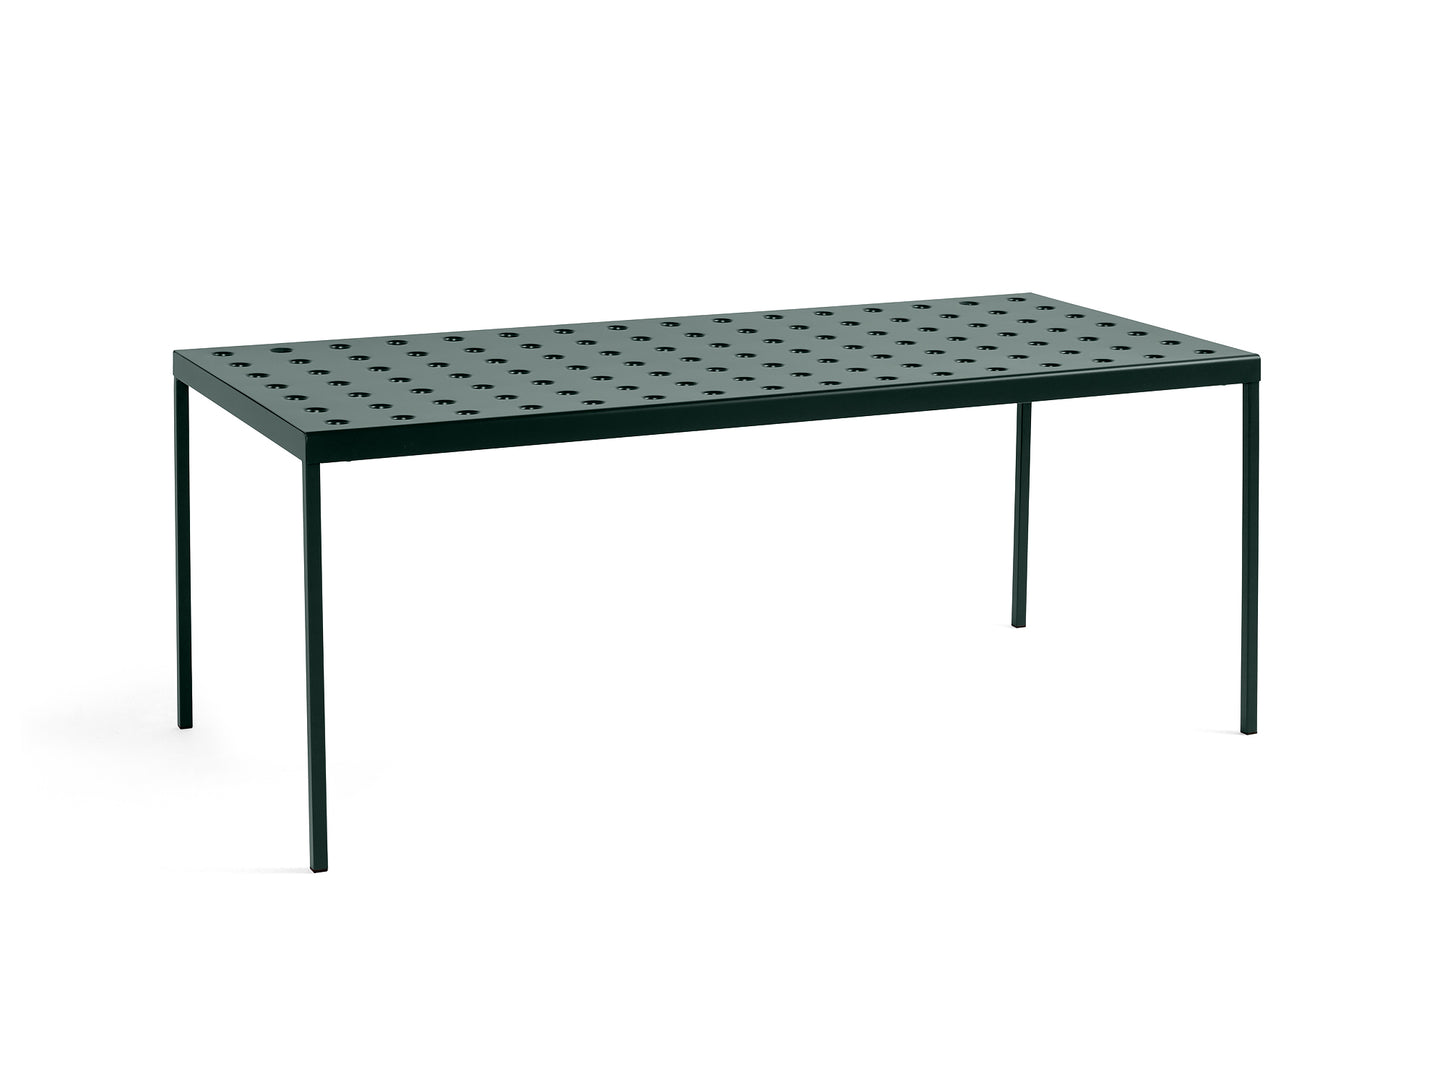 Dark Forest / L190 cm / Balcony Outdoor Dining Table by HAY